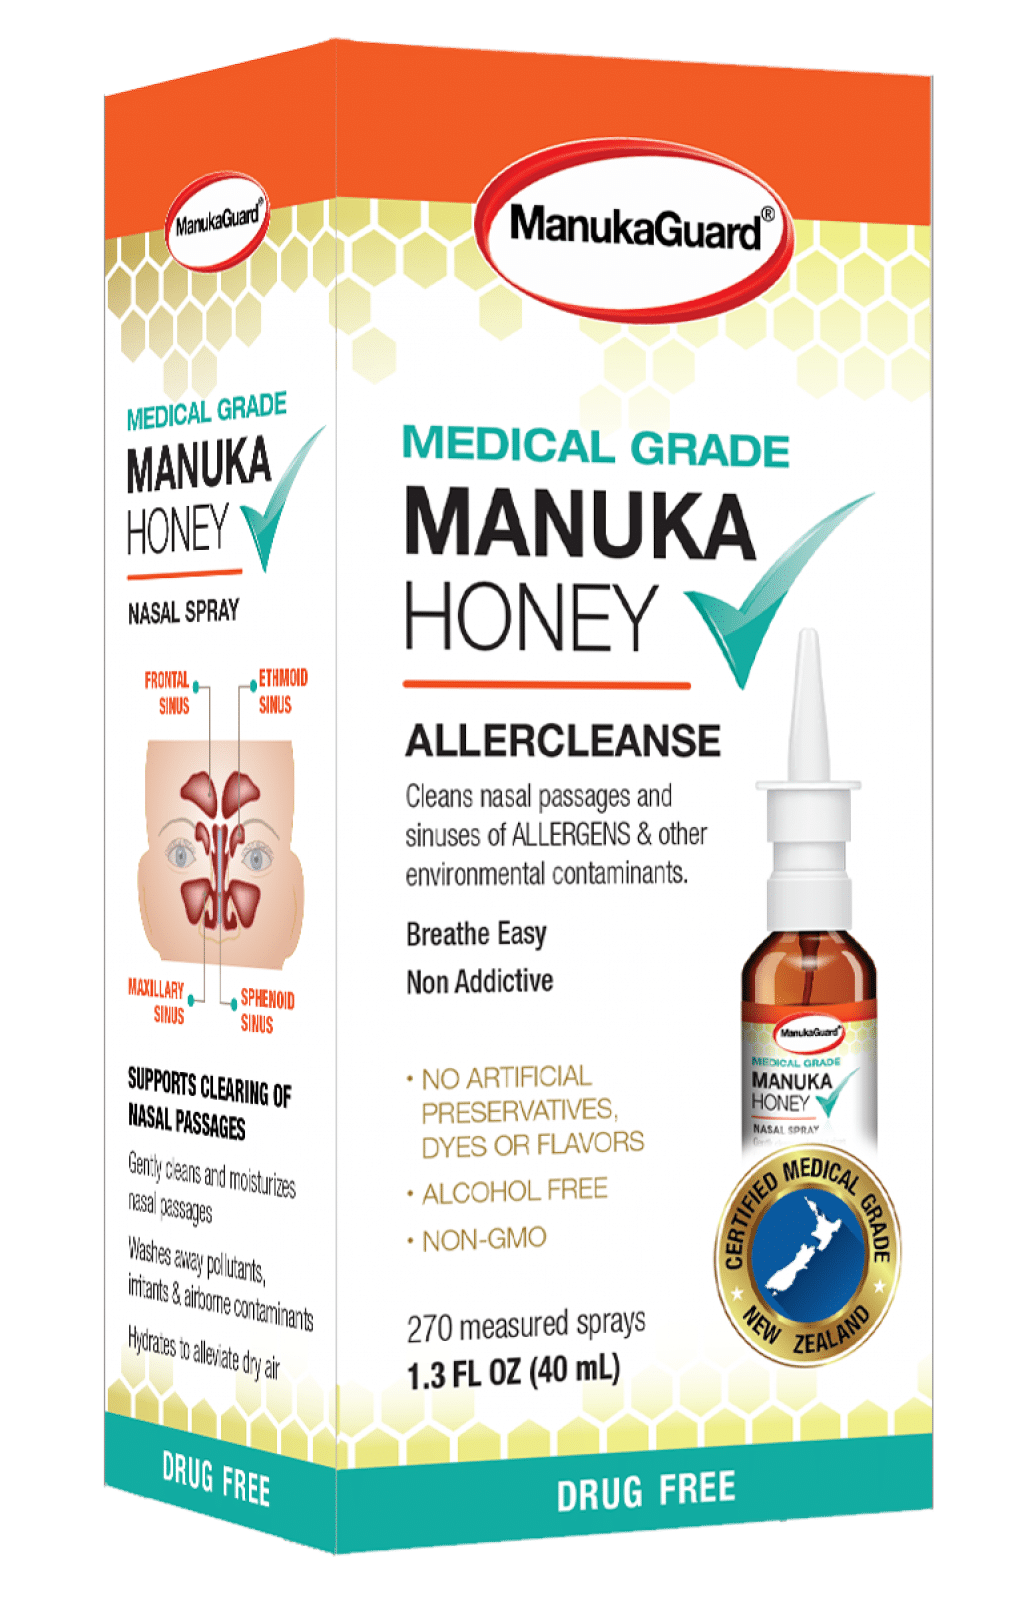 ManukaGuard Allercleanse Nasal Spray Recalled for Fungal Infection Risk